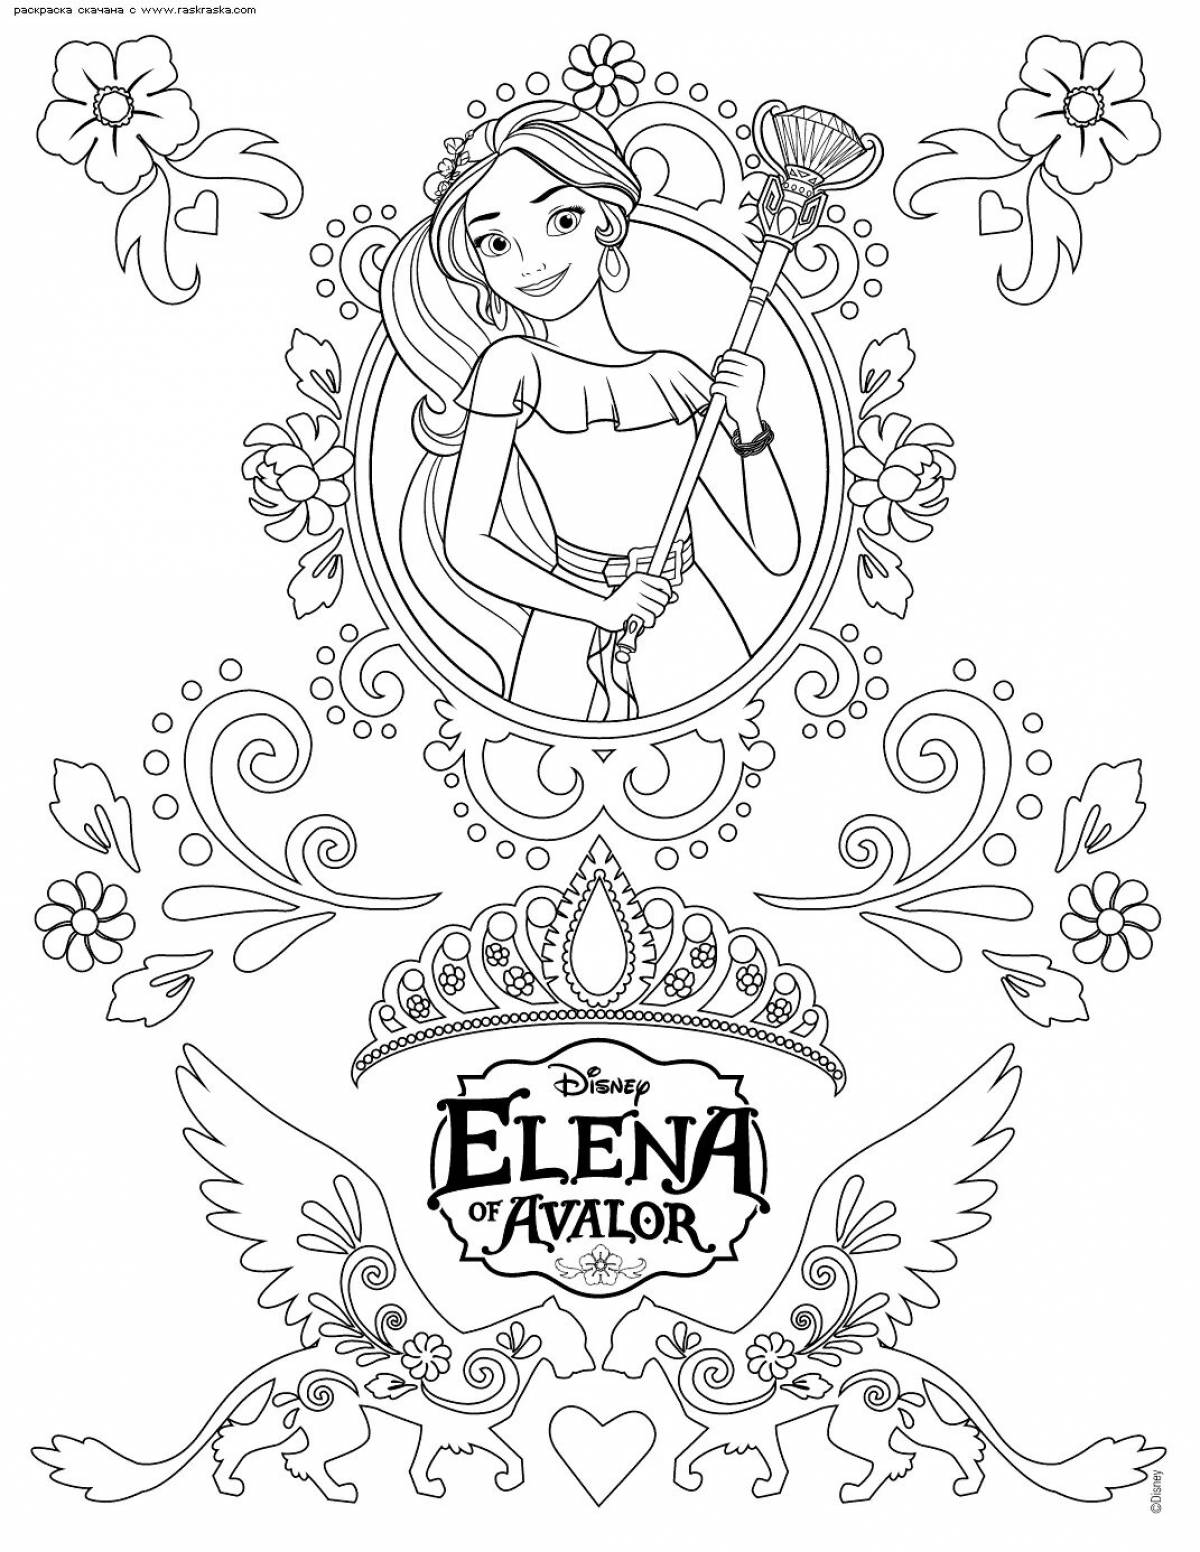 Coloring page wonderful elena of avalor